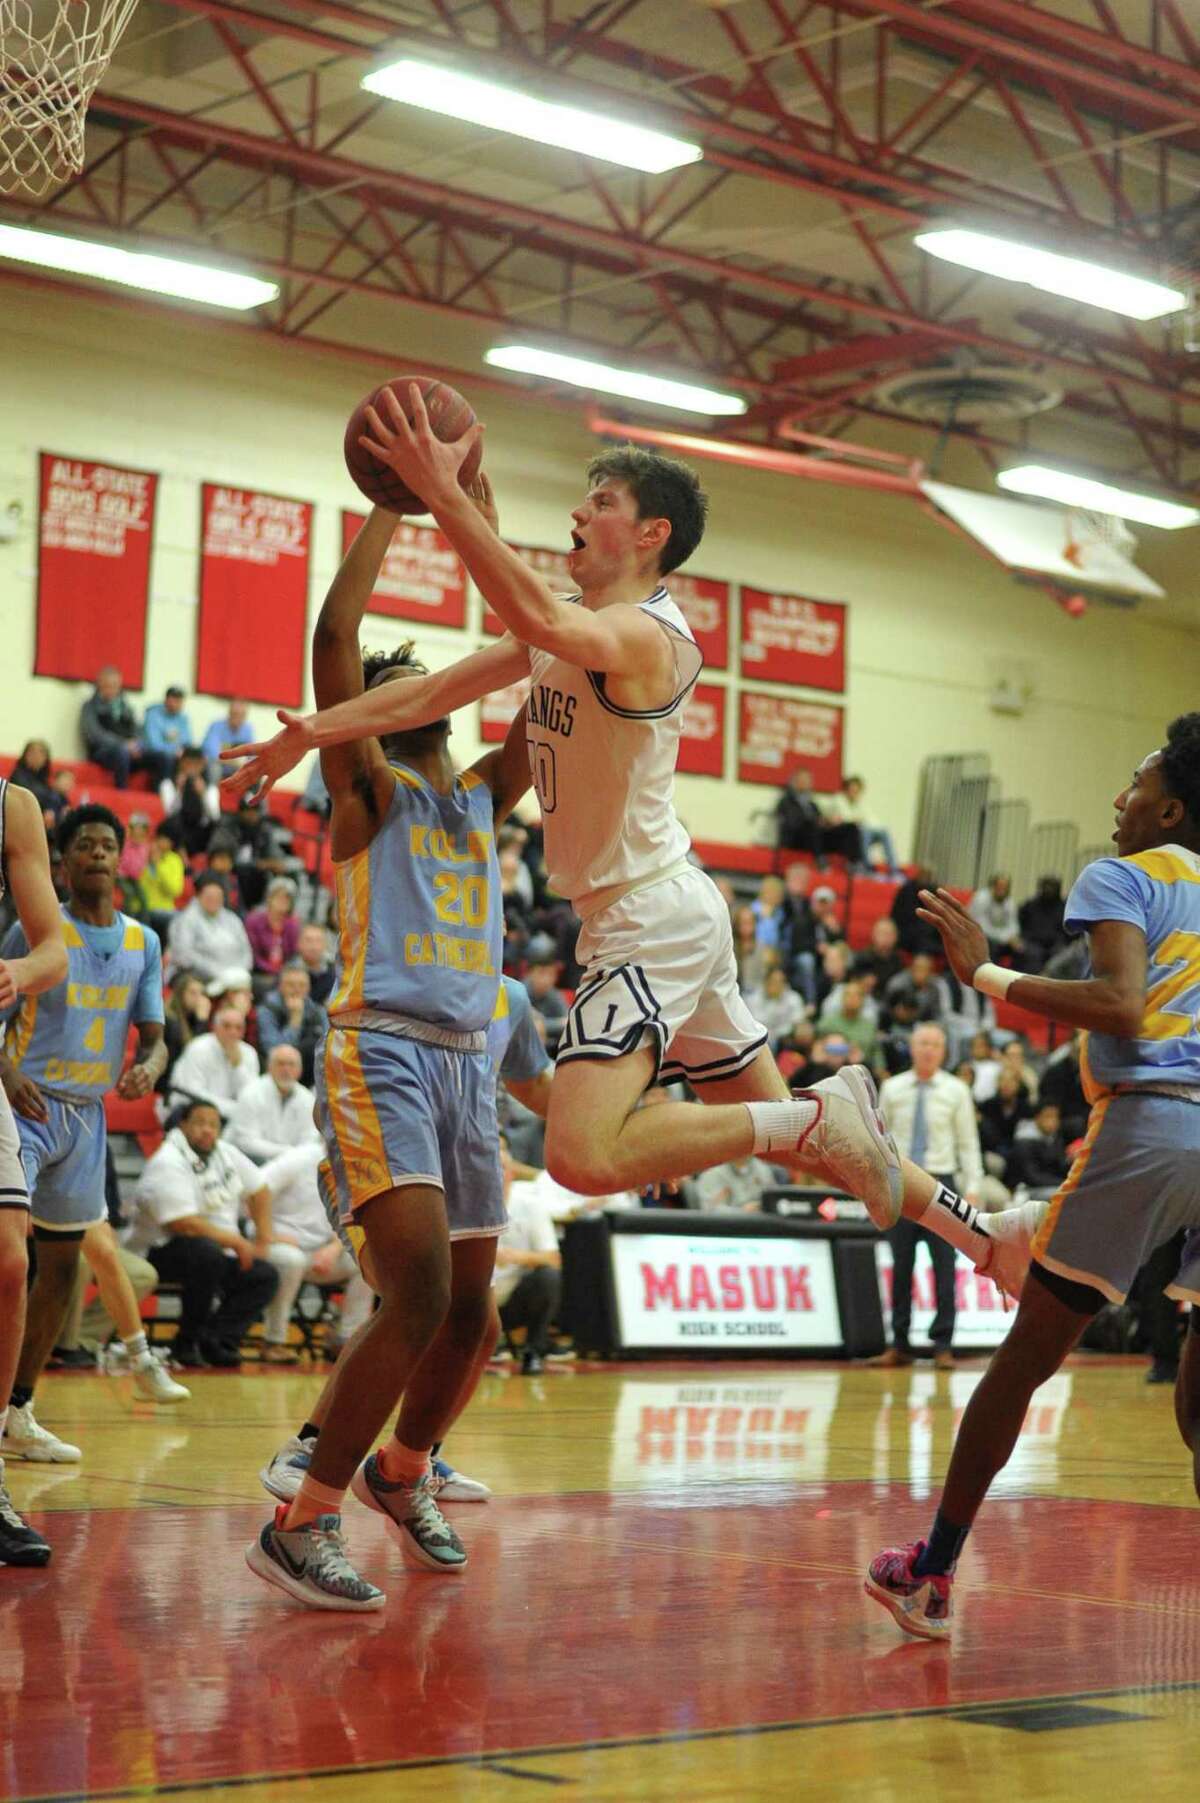 Michael Iannetta (10) of the Immaculate Mustangs drives to the basket during the SWC Boys Basketball Championship against Kolbe Cathedral on Thursday March 5 ,2020 at Masuk Hig School in Monroe, Connecticut.